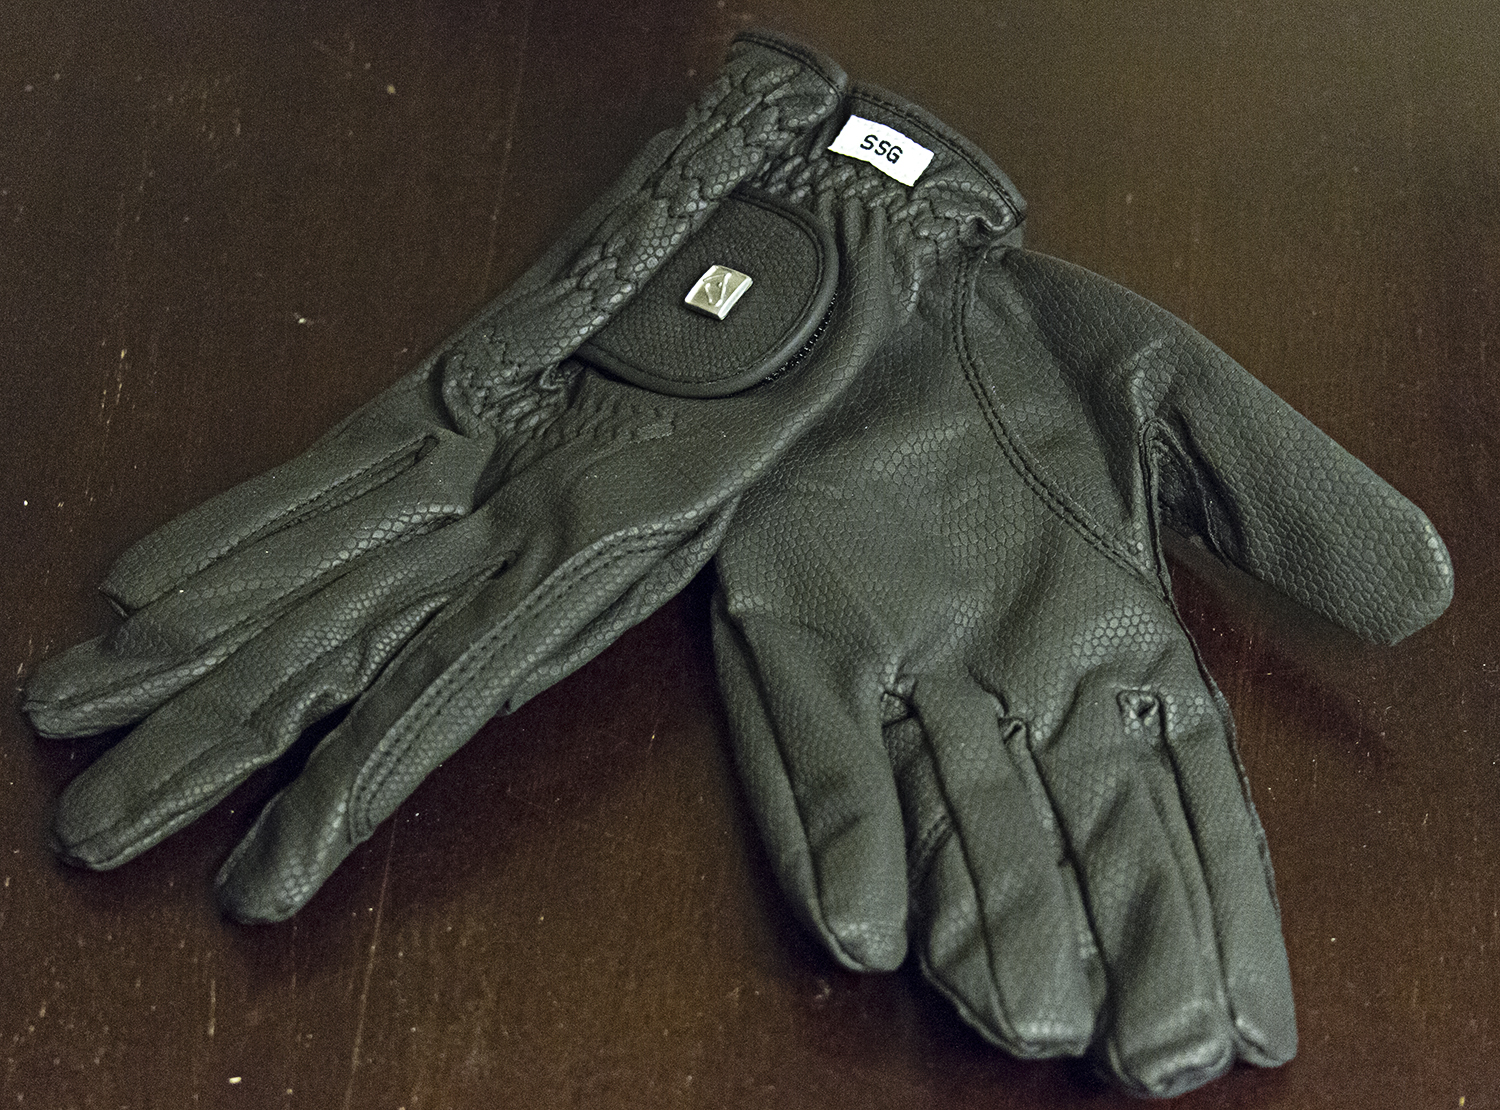 SSG Soft Touch Winter Glove review